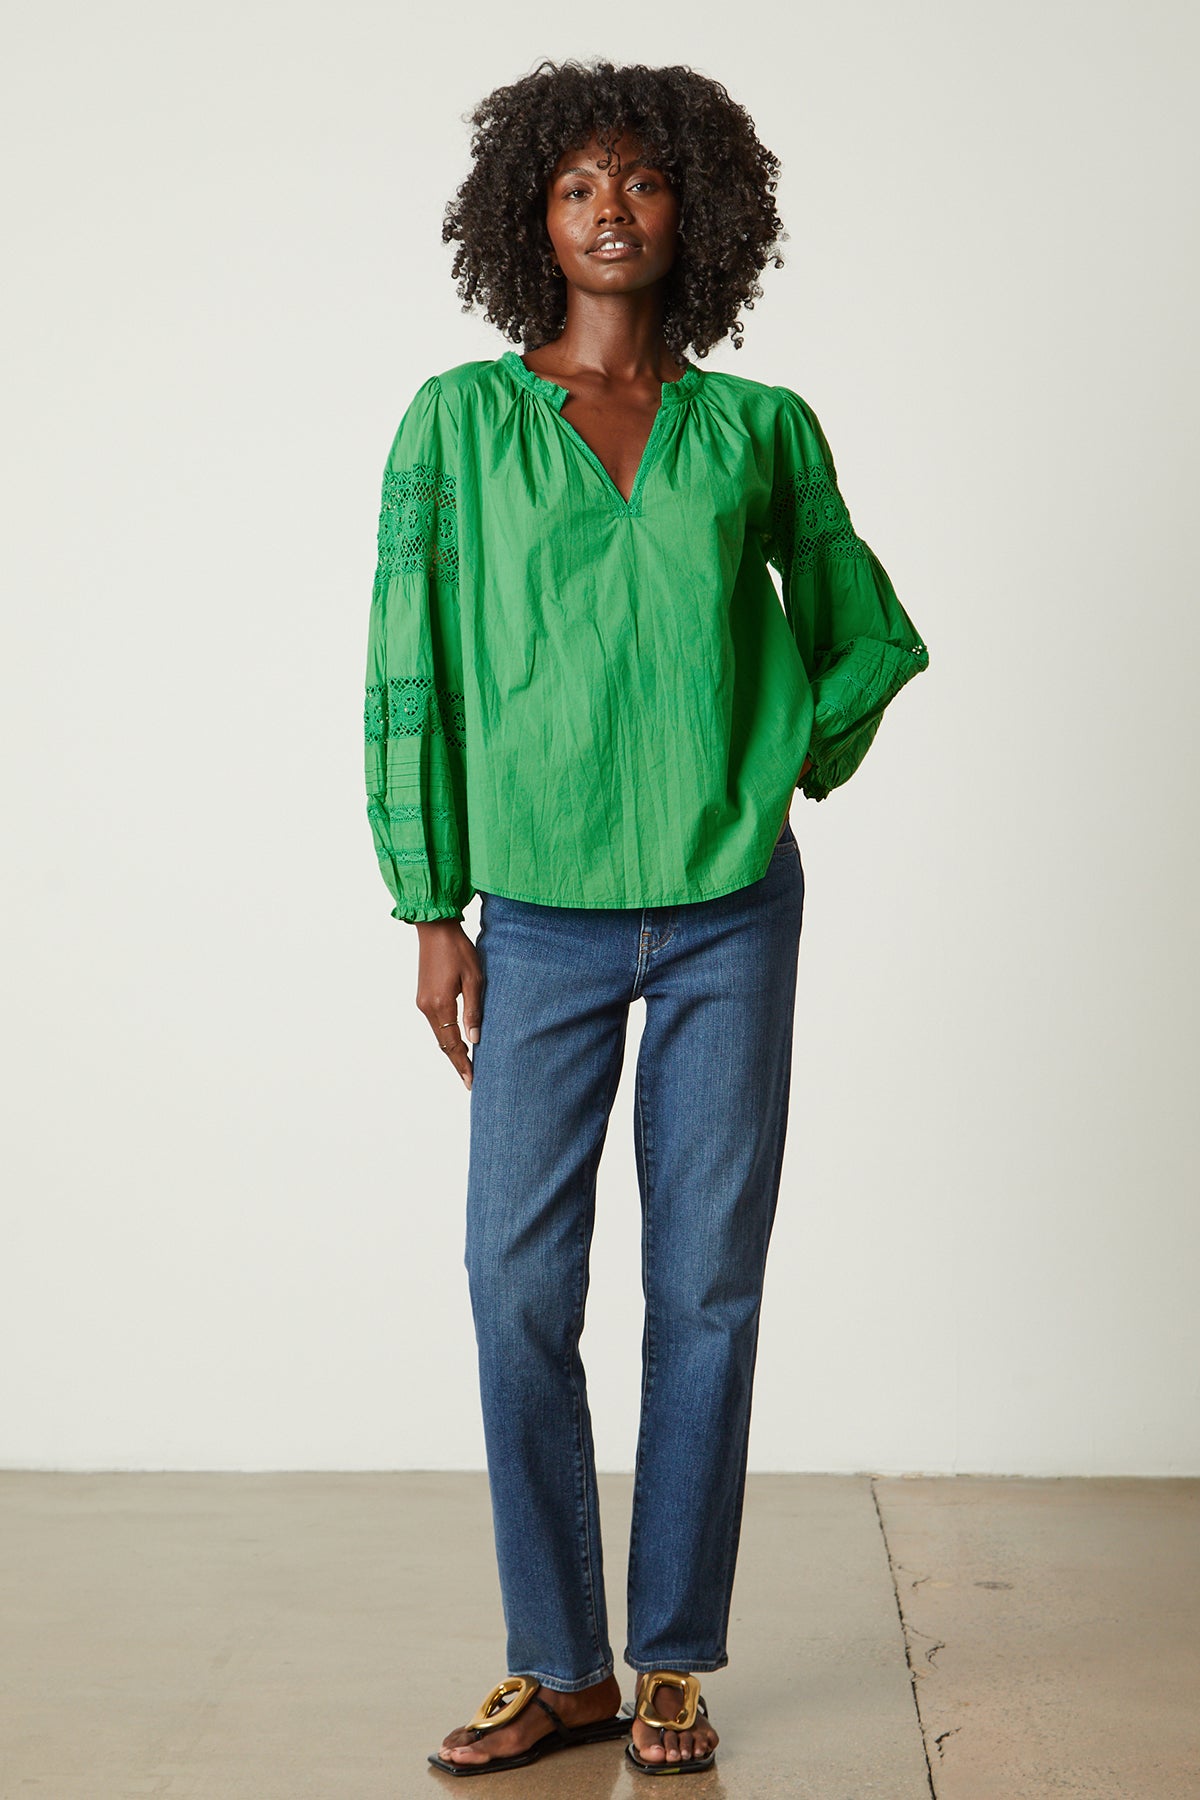 The model is wearing a green Velvet by Graham & Spencer TAYLER COTTON LACE BOHO TOP and jeans.-26496296157377